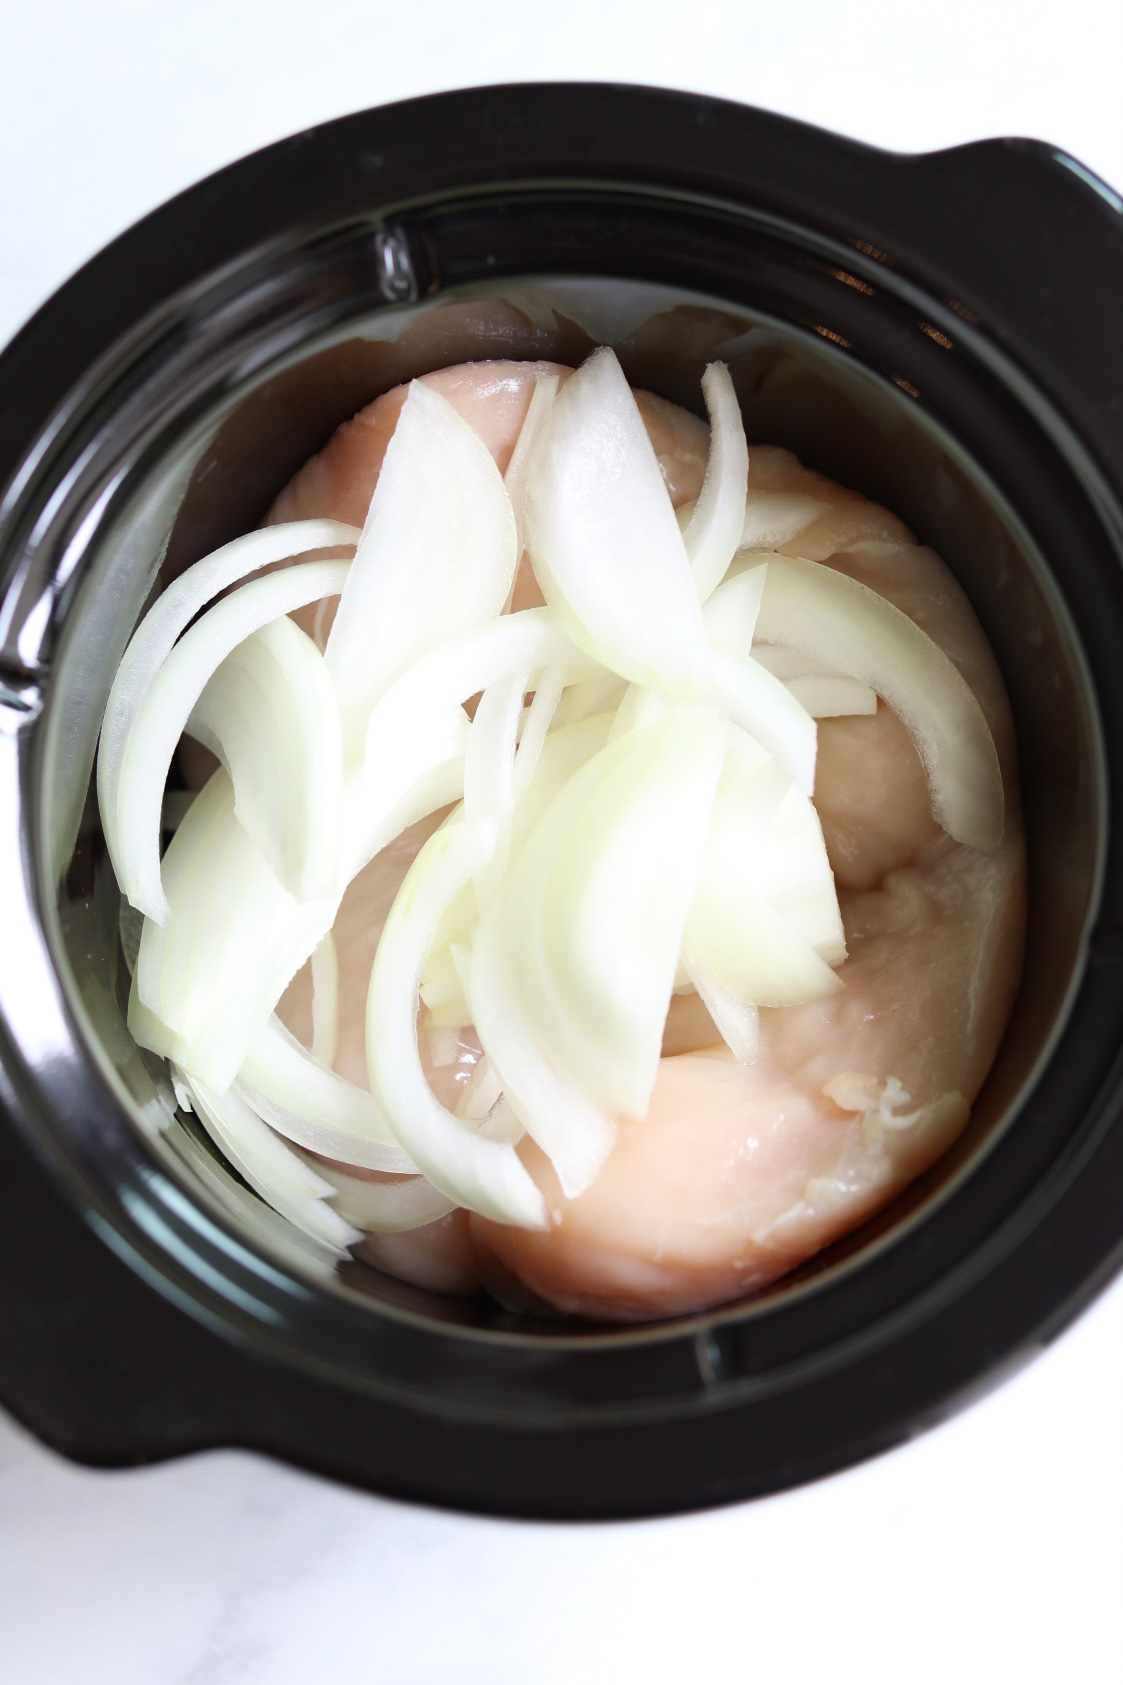 onions and chicken breasts in crockpot